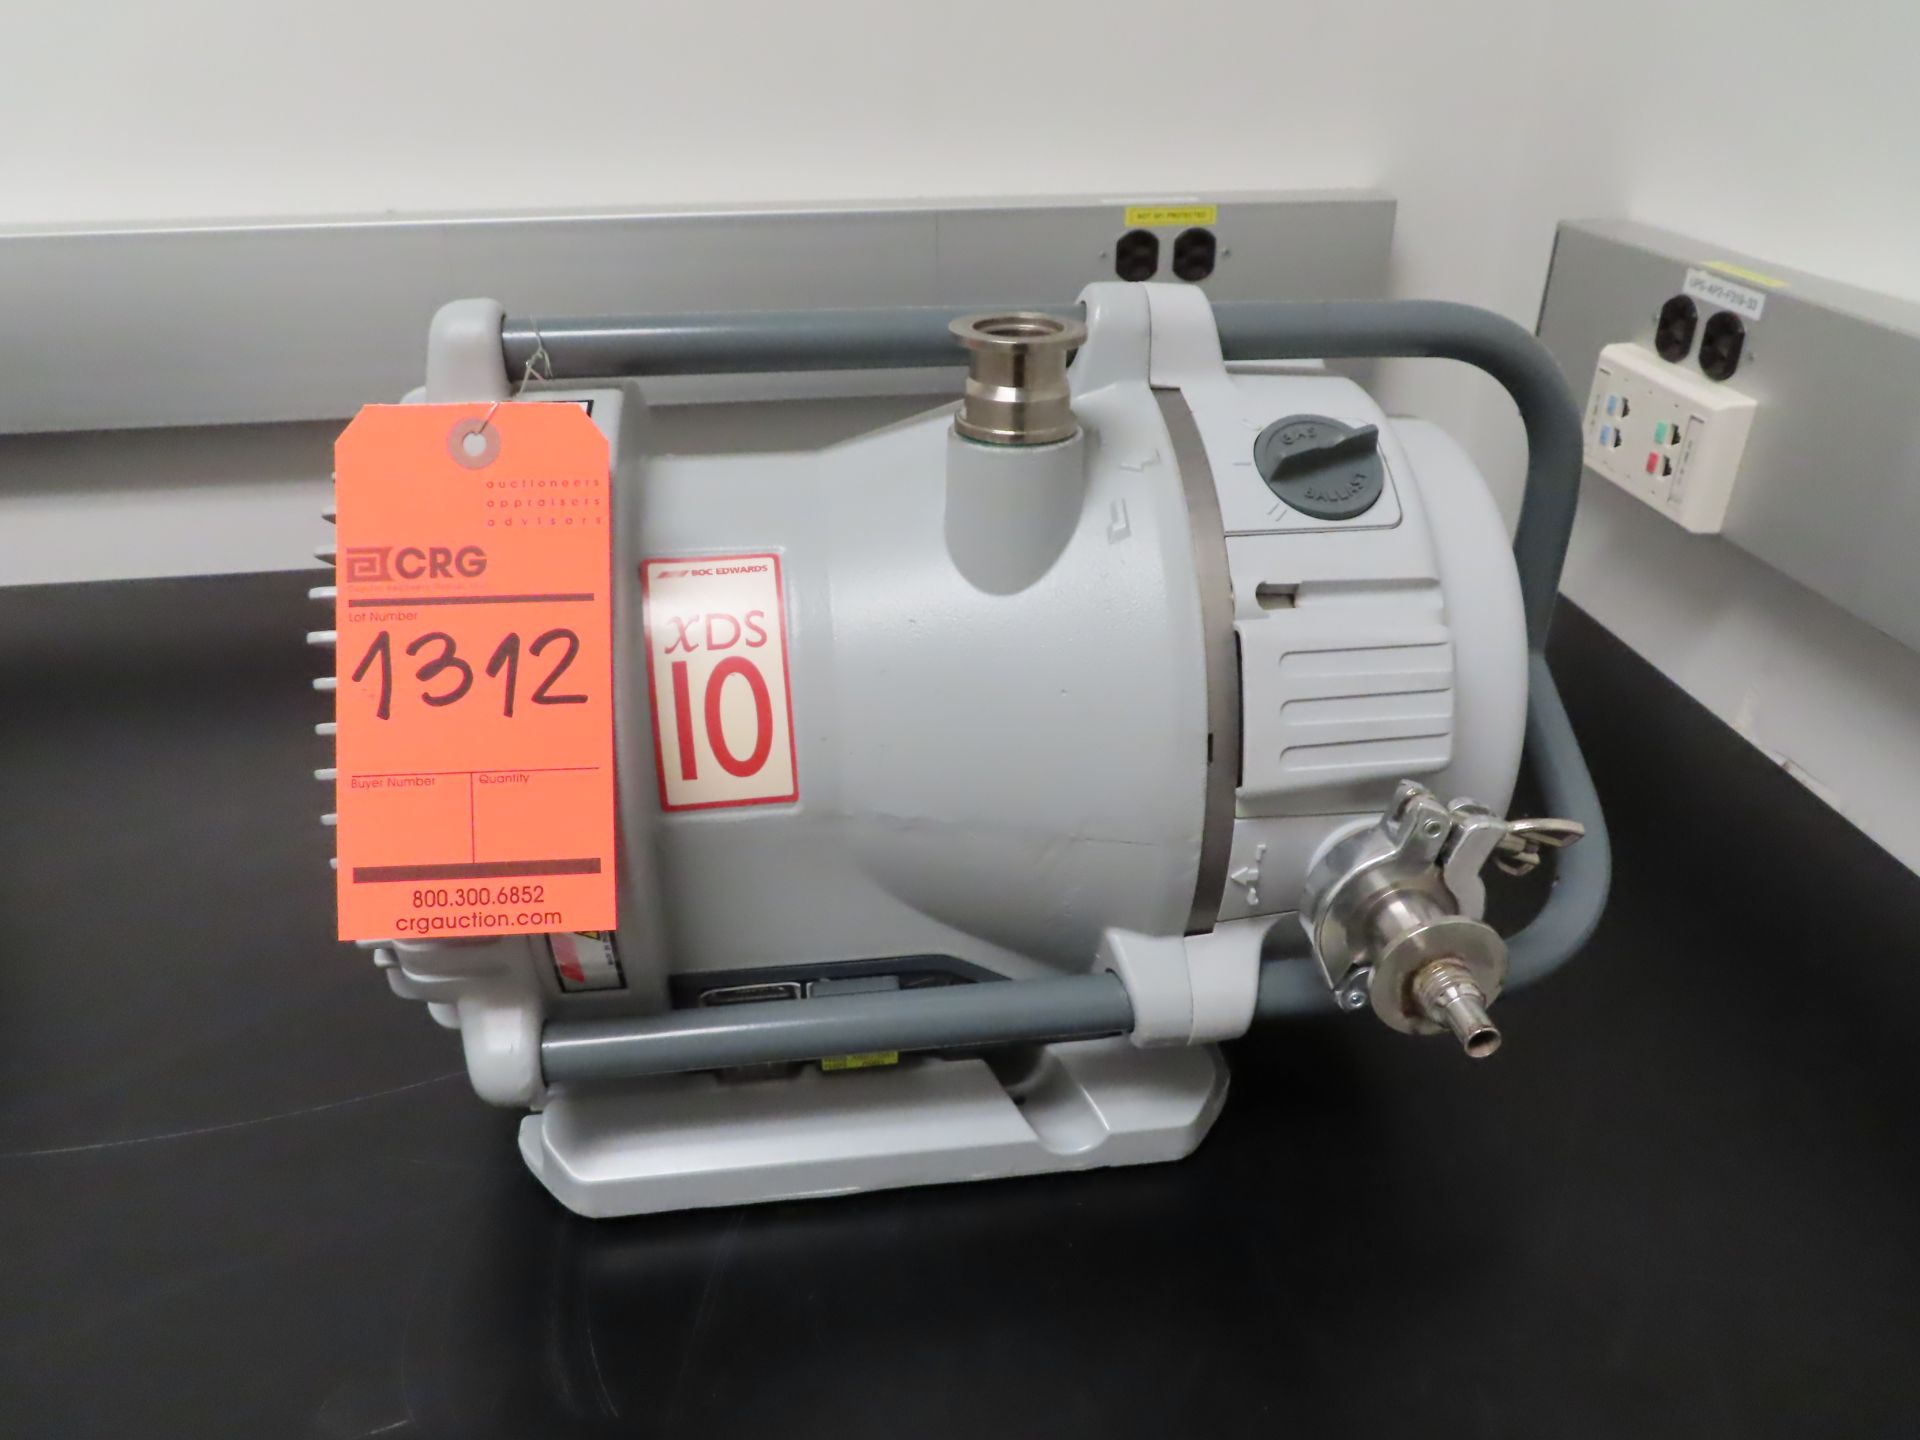 Edwards XDS 10 scroll pump, s/n 37746671, located in building 5, 3rd floor, room F316